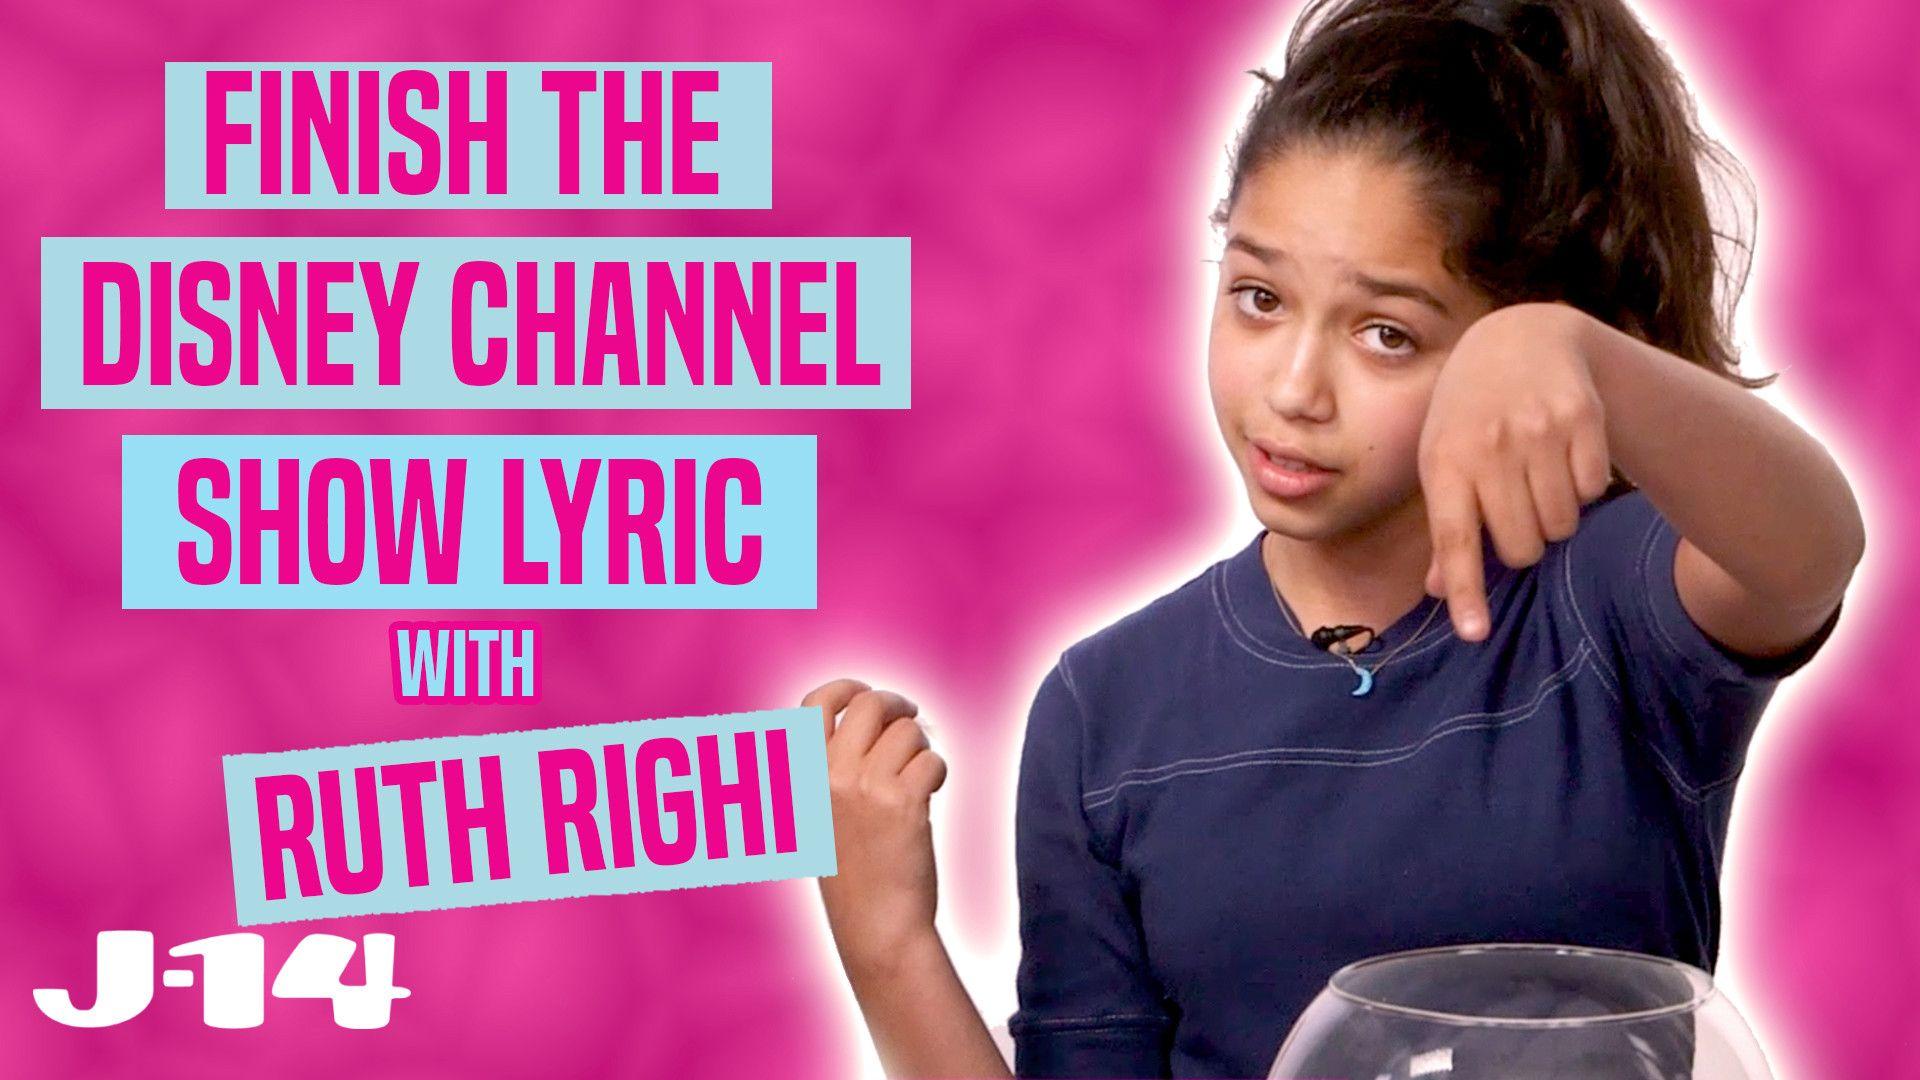 Sydney to the Max' Star Ruth Righi Slays Our Disney Channel